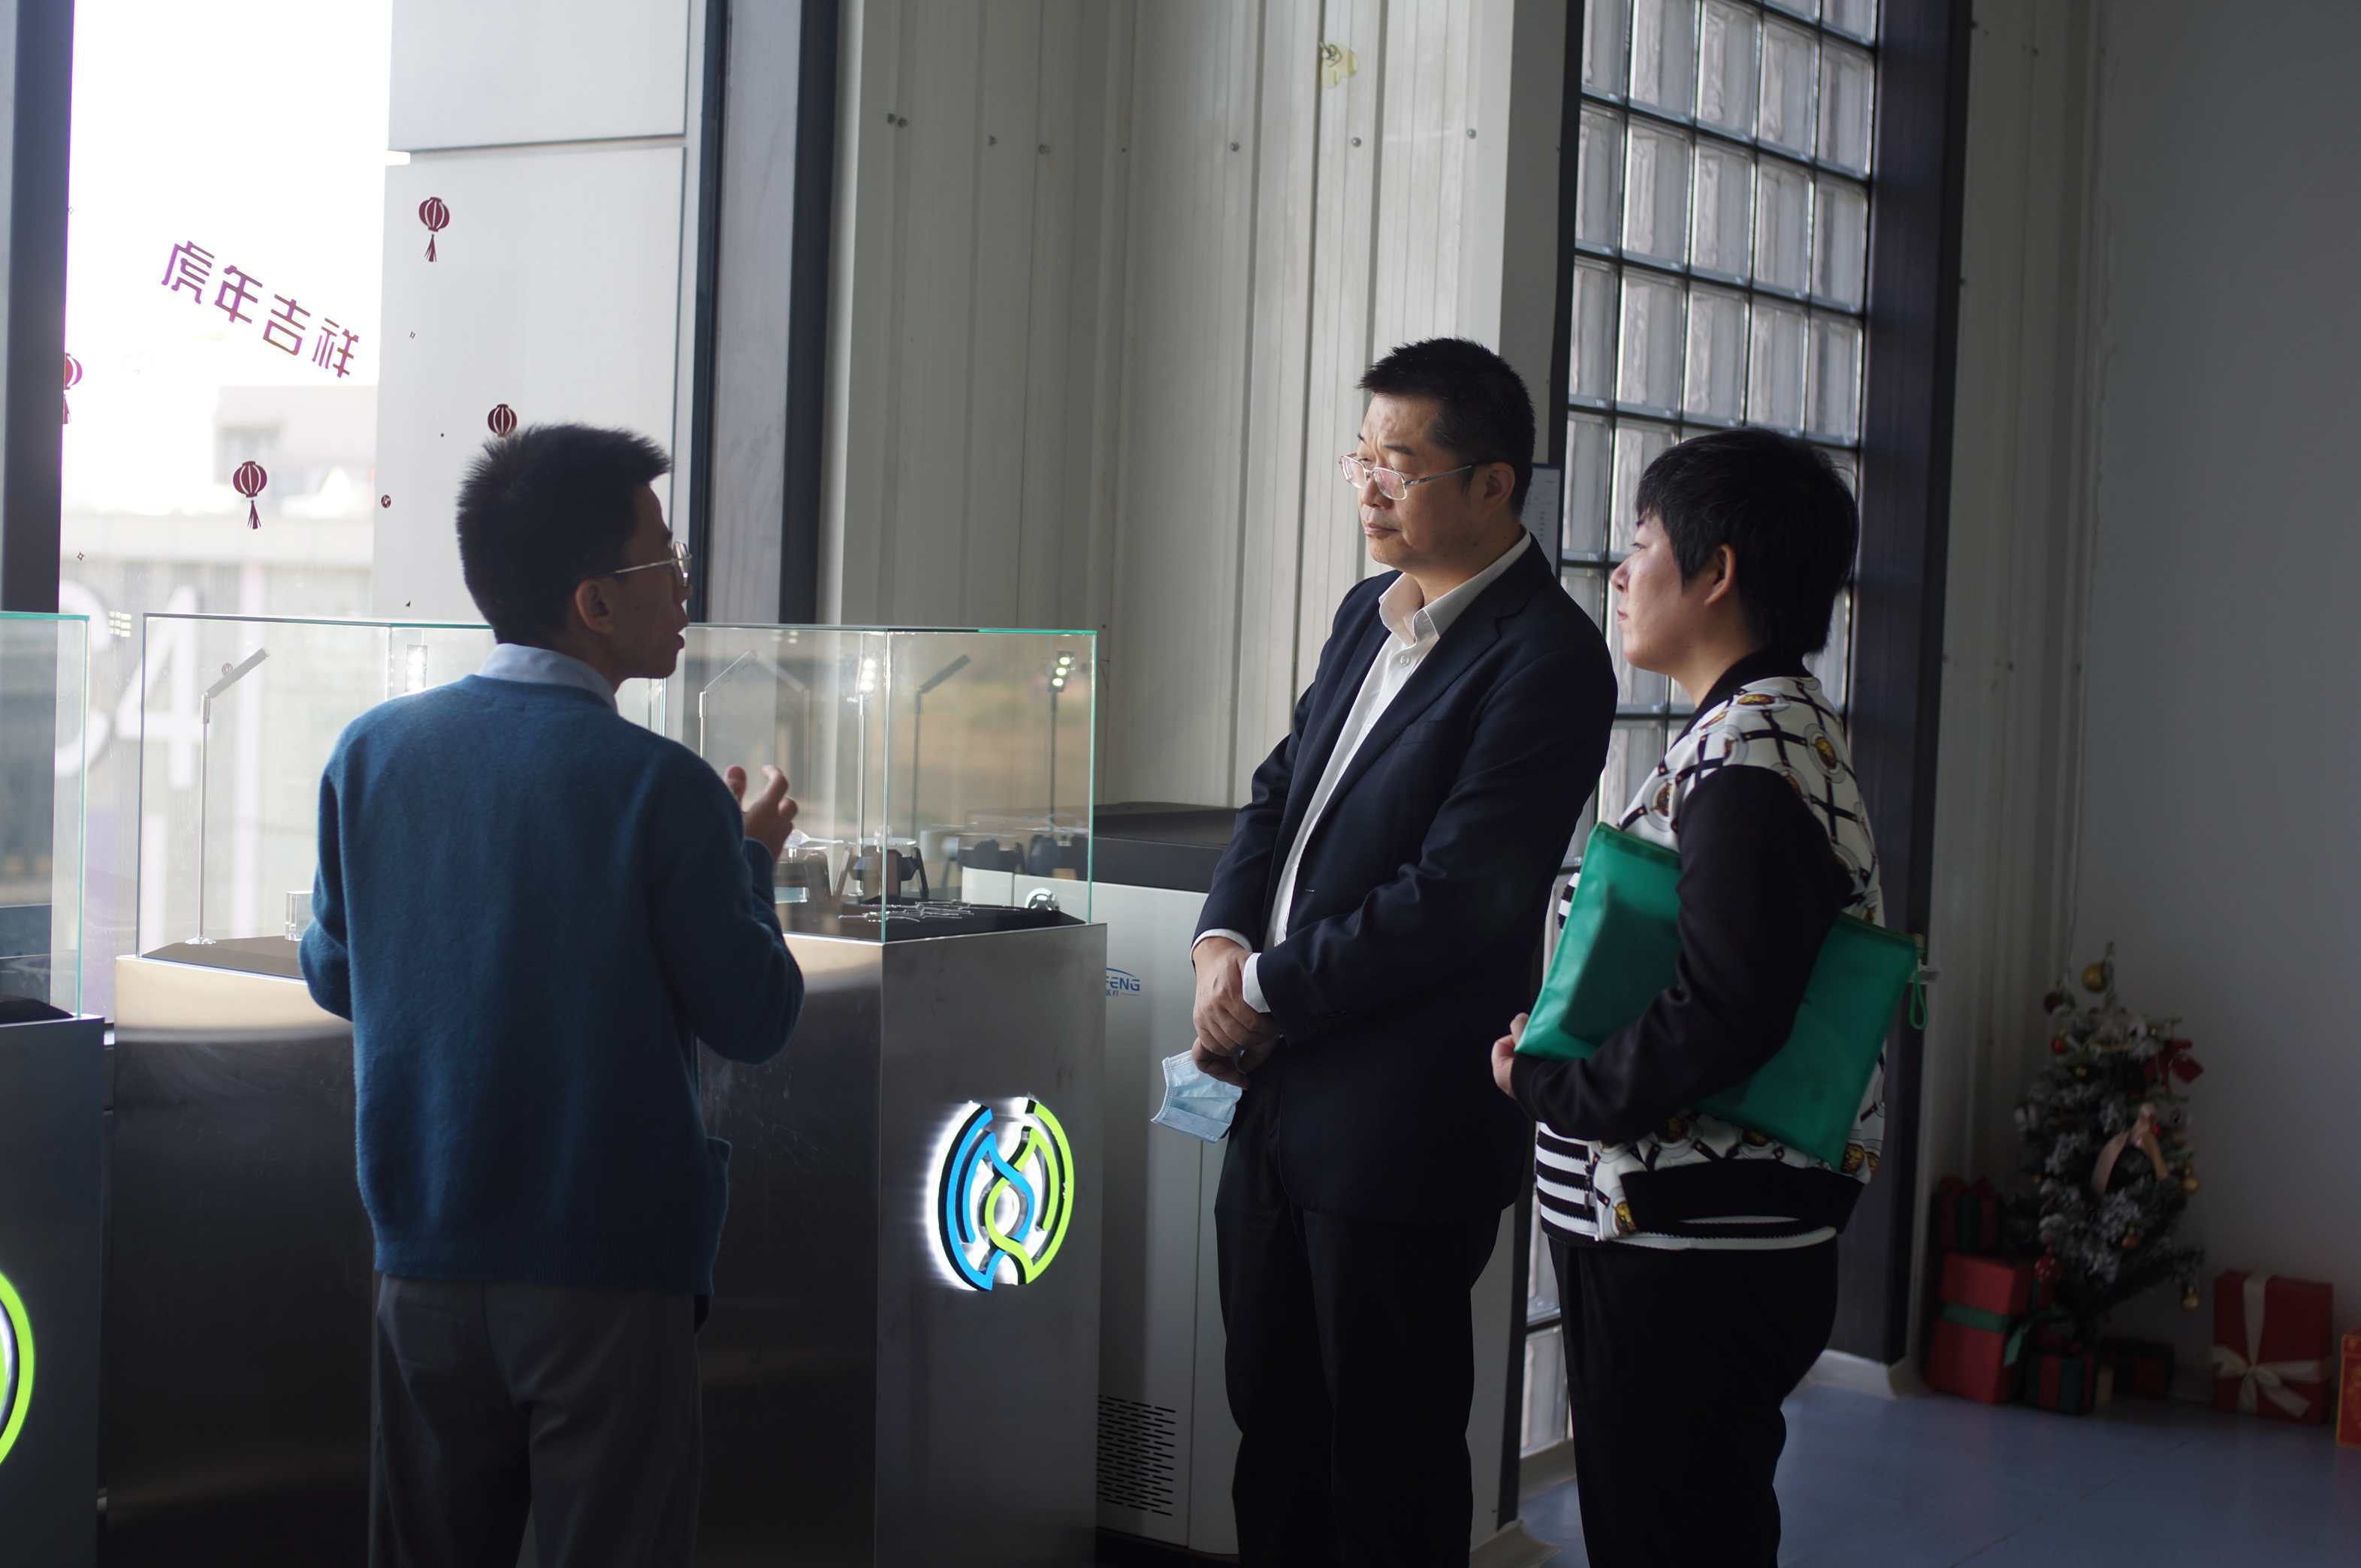 On November 4, 2022, leaders of Zhongshan Health Base Group visited our company